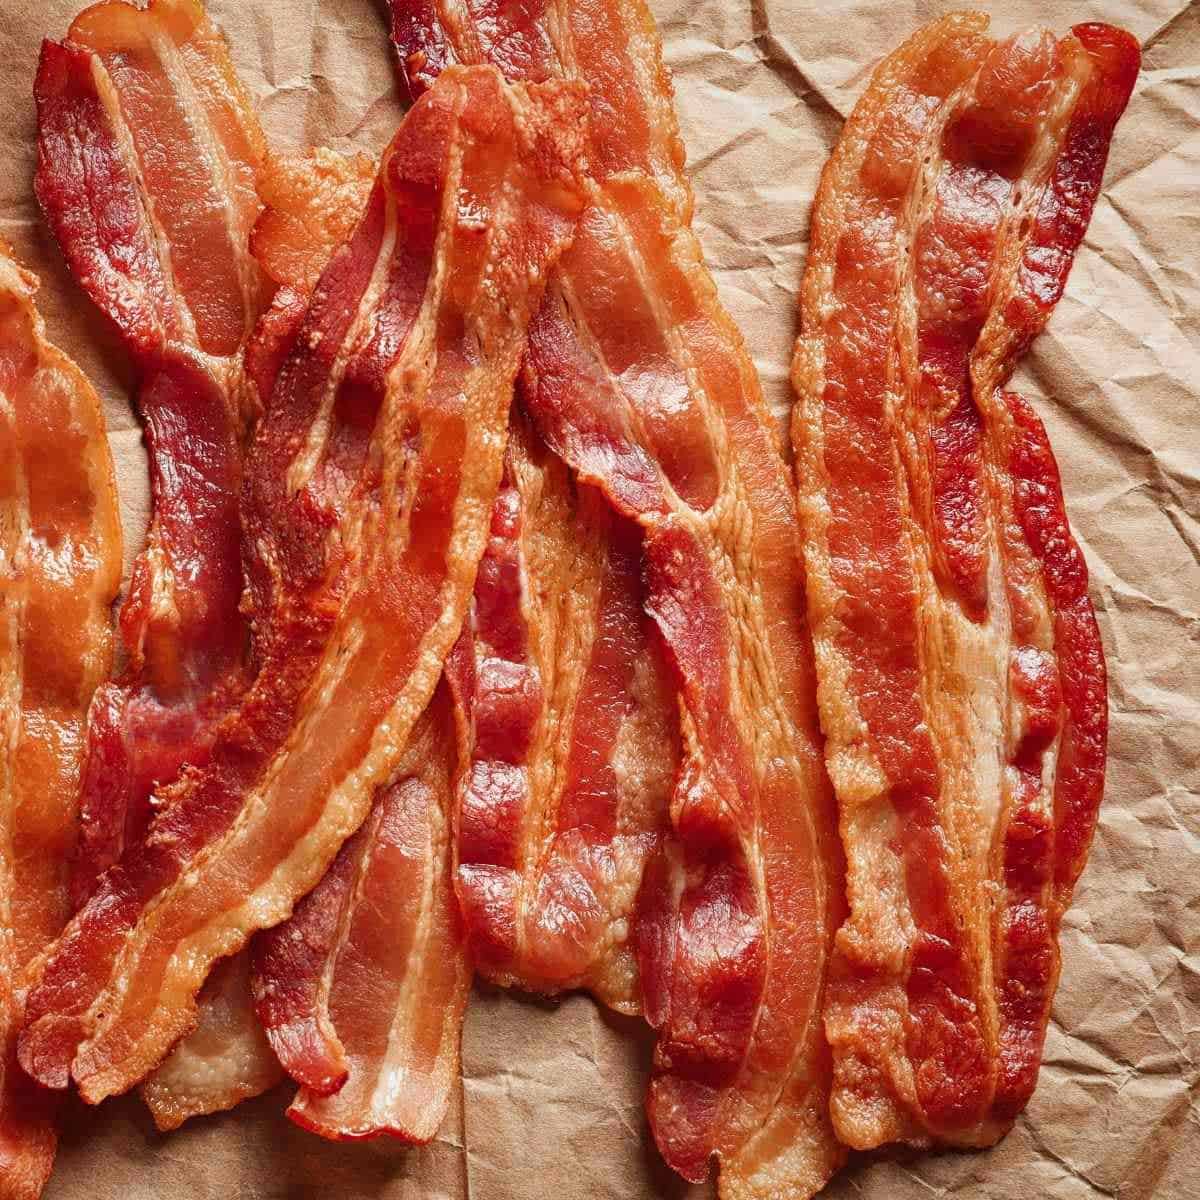 Eight slices of golden brown cooked bacon on a piece of brown paper.